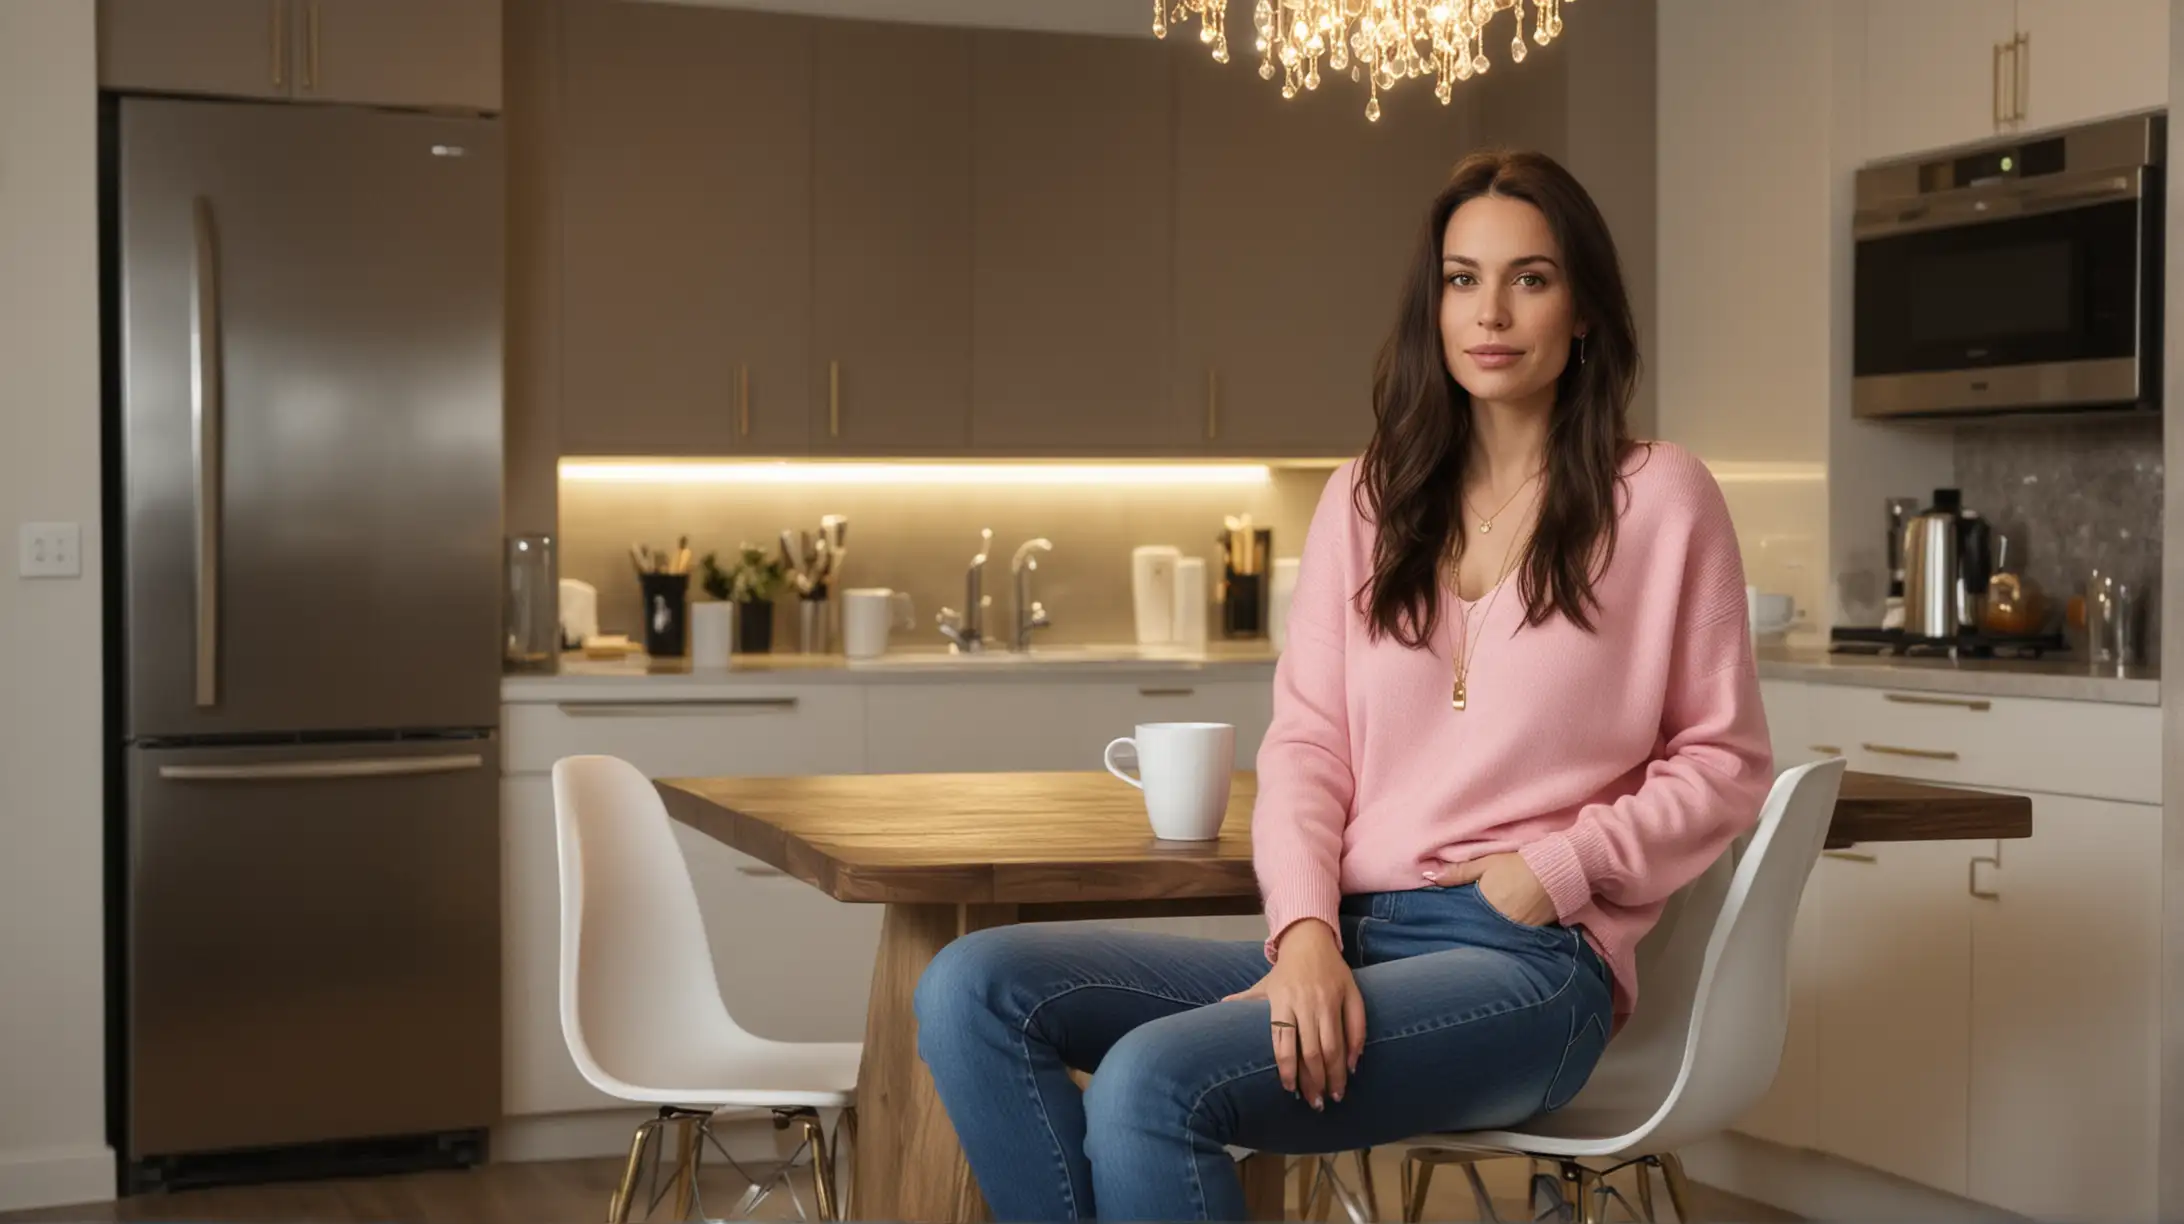 30 year old nude white woman with long dark brown hair and gold necklace, pink sweater and blue jeans, sitting at kitchen table with one cup of team, modern high rise urban apartment background at night